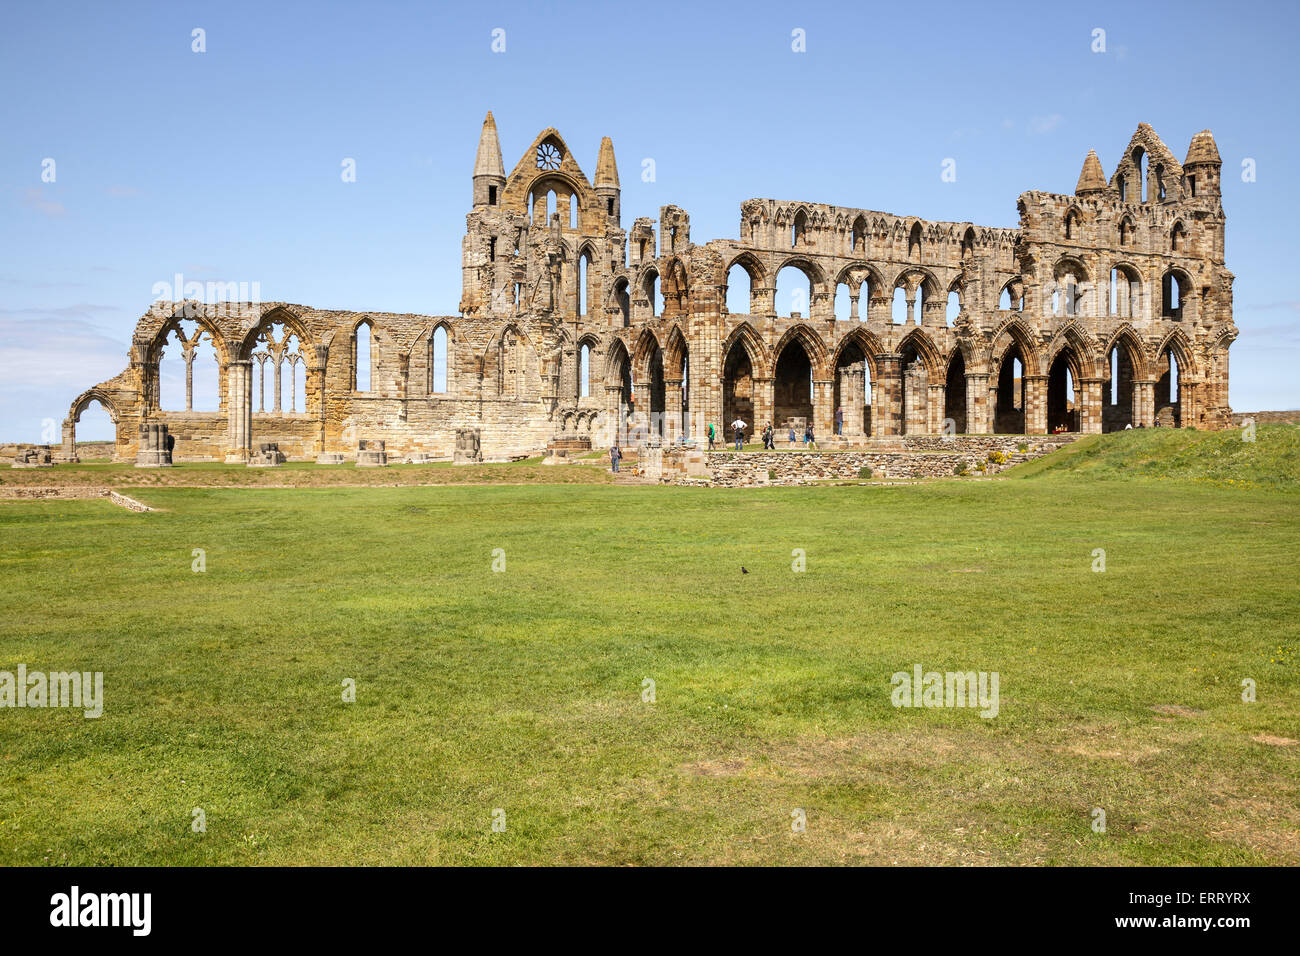 L'Abbaye de Whitby, Yorkshire, Angleterre Banque D'Images